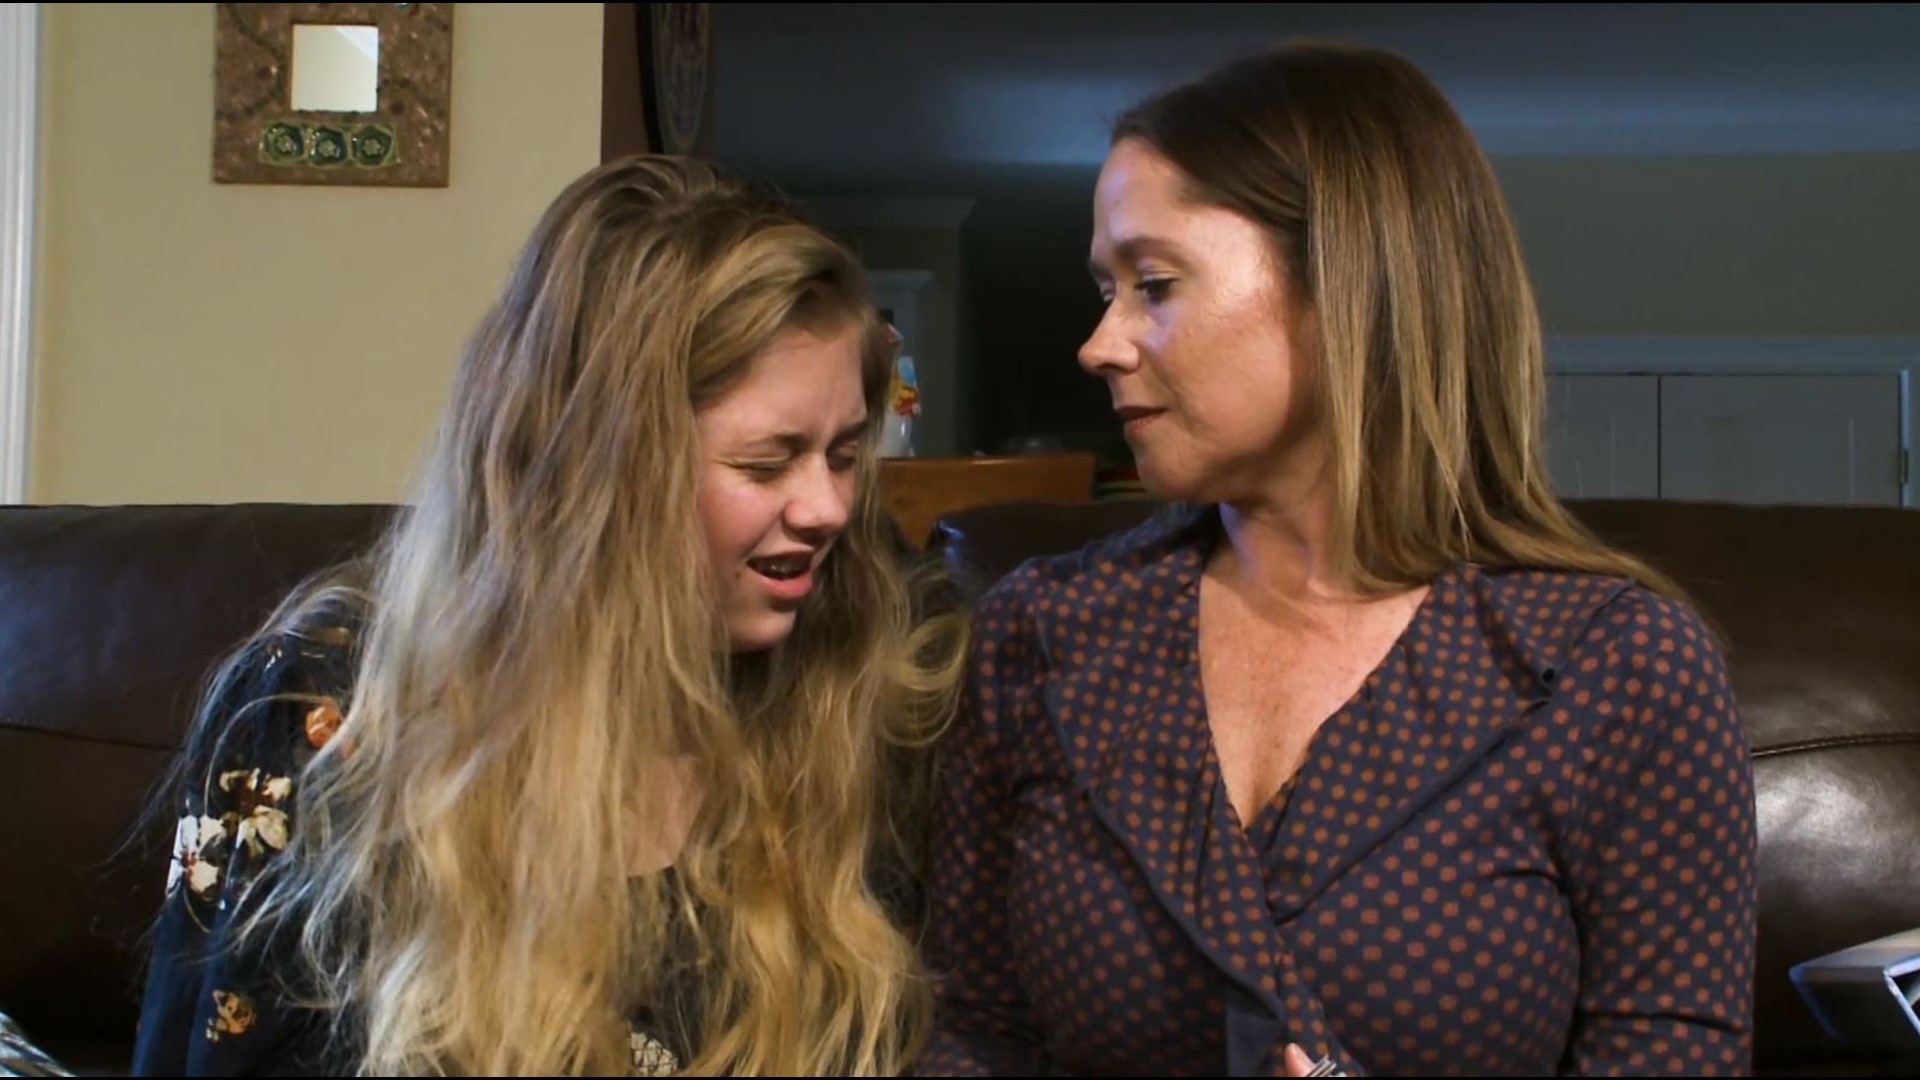 Kayleigh was born with multiple mental and developmental delays. Believing the state could help her daughter access better treatments, she gave up custody.